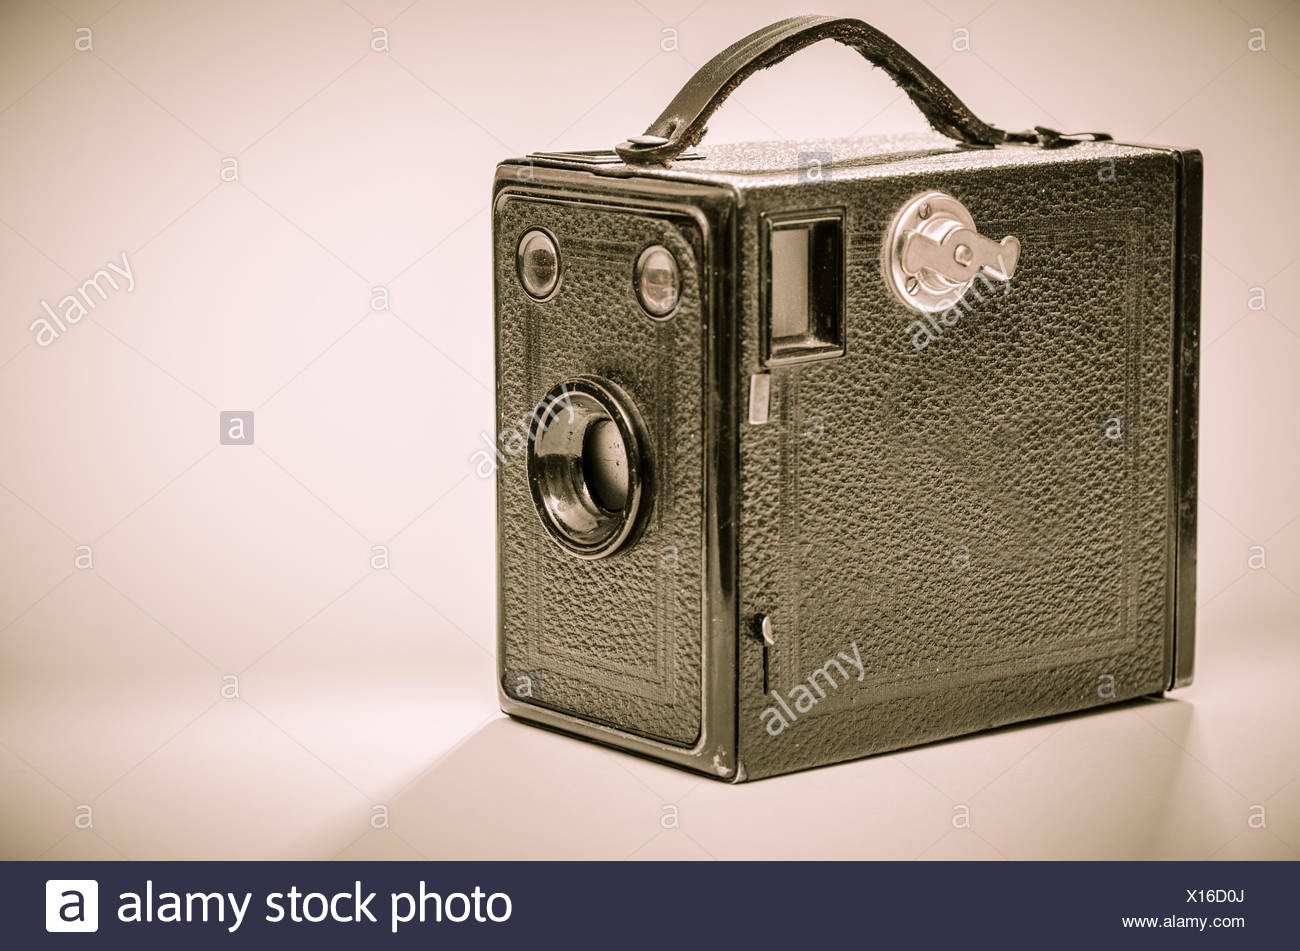 Sepia Tonung High Resolution Stock Photography and Images - Alamy